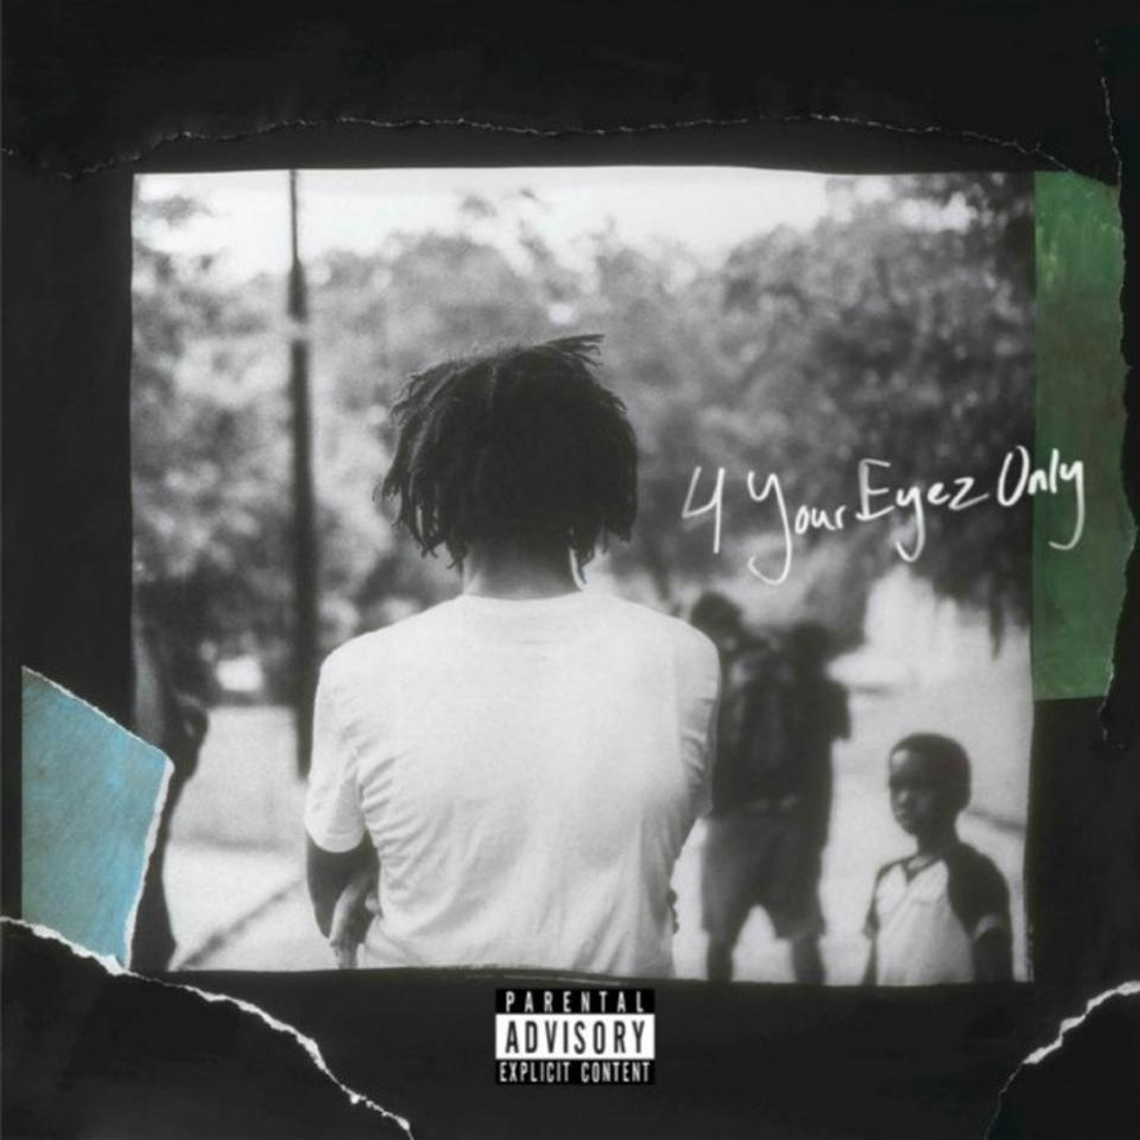 The Man Behind J. Cole's '4 Your Eyez Only' Album Cover Shares Personal Story of Its Creation